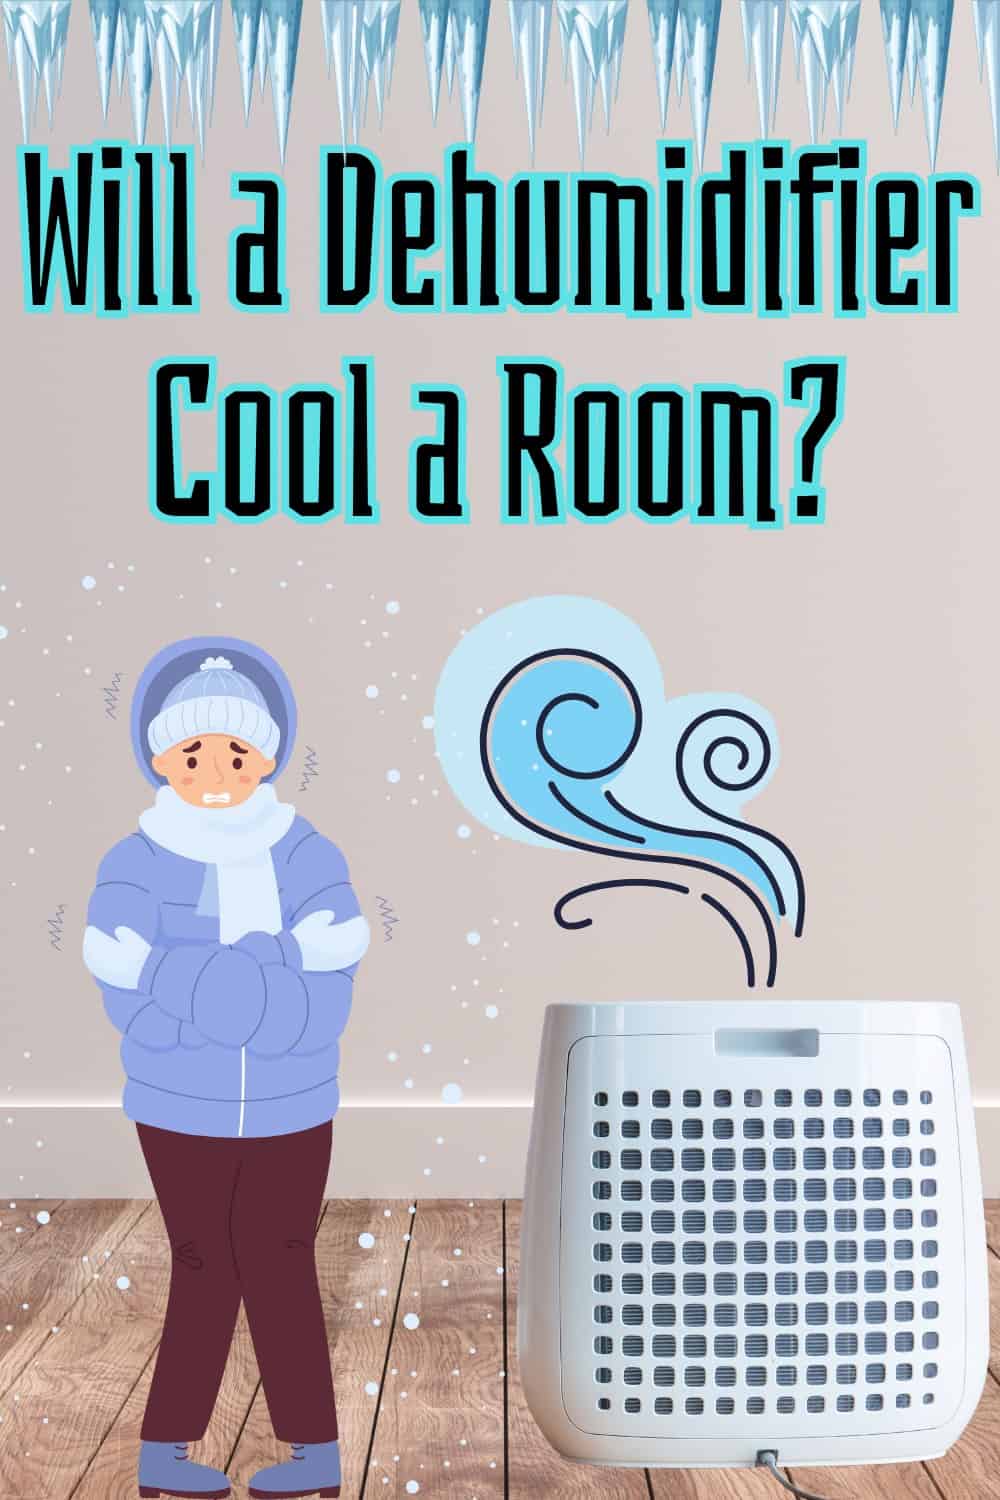 No A dehumidifier will not help to cool a room